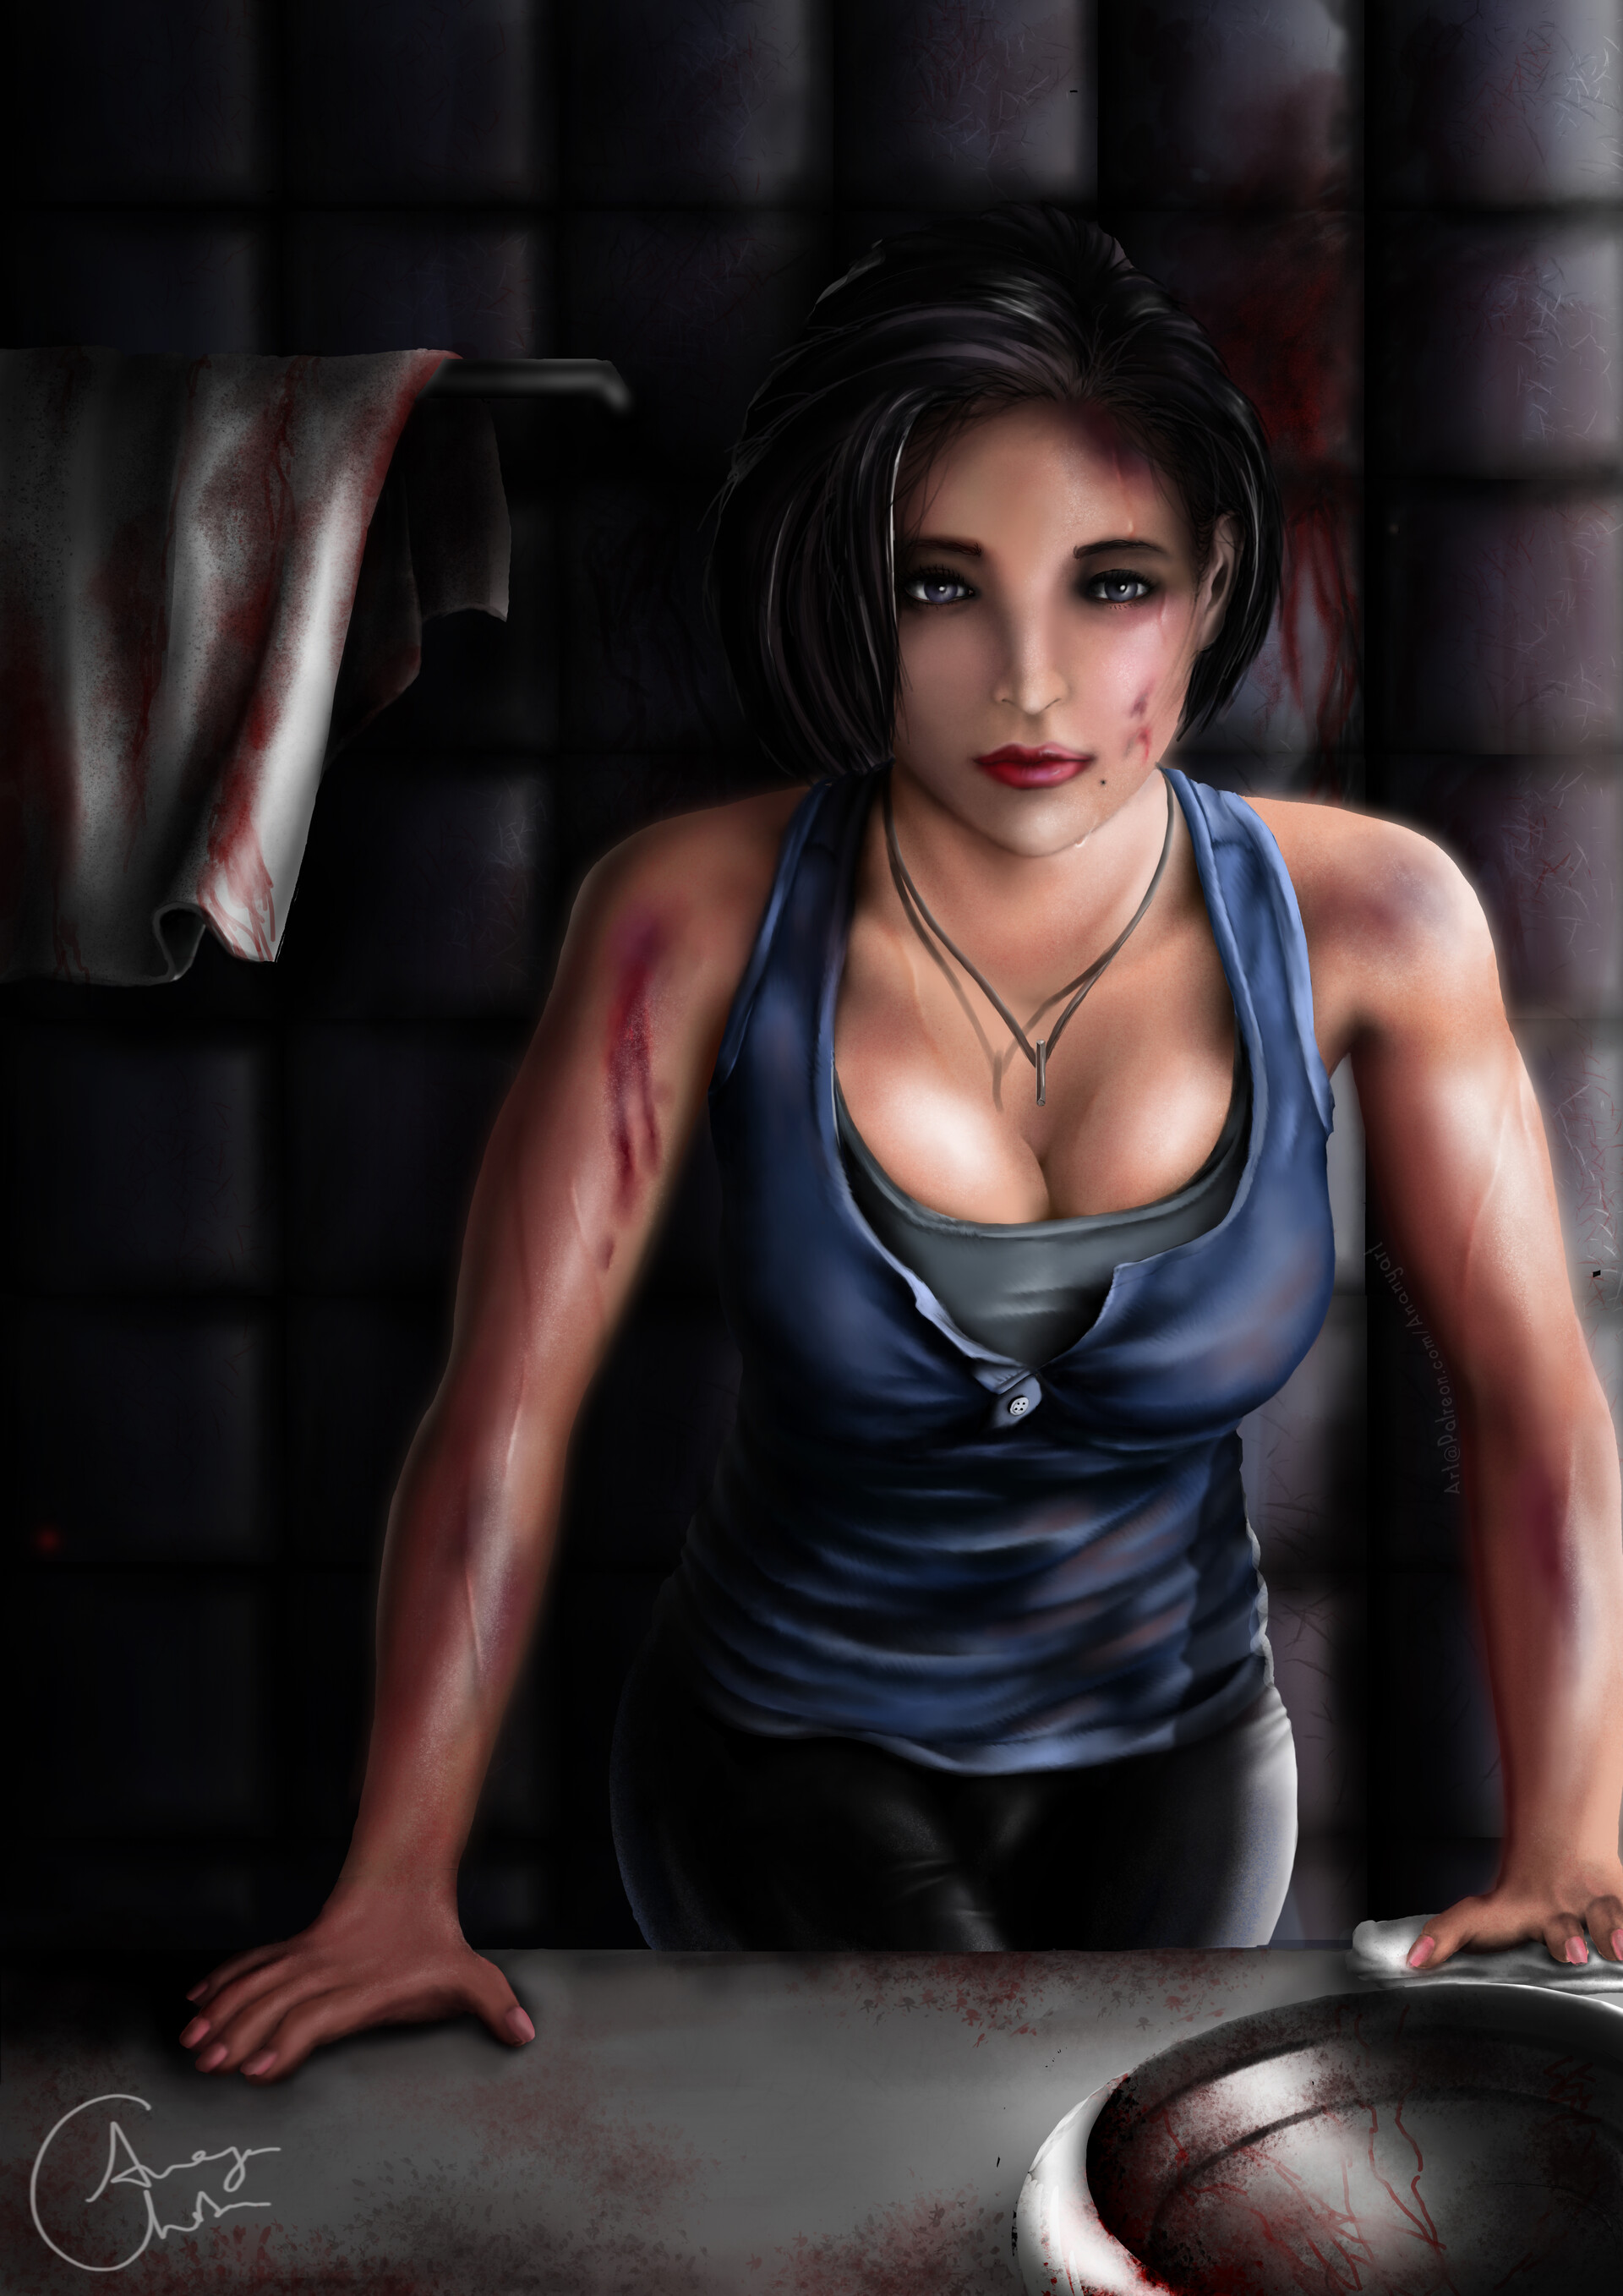 Jill Valentine from the game Resident Evil 3 Remake. 